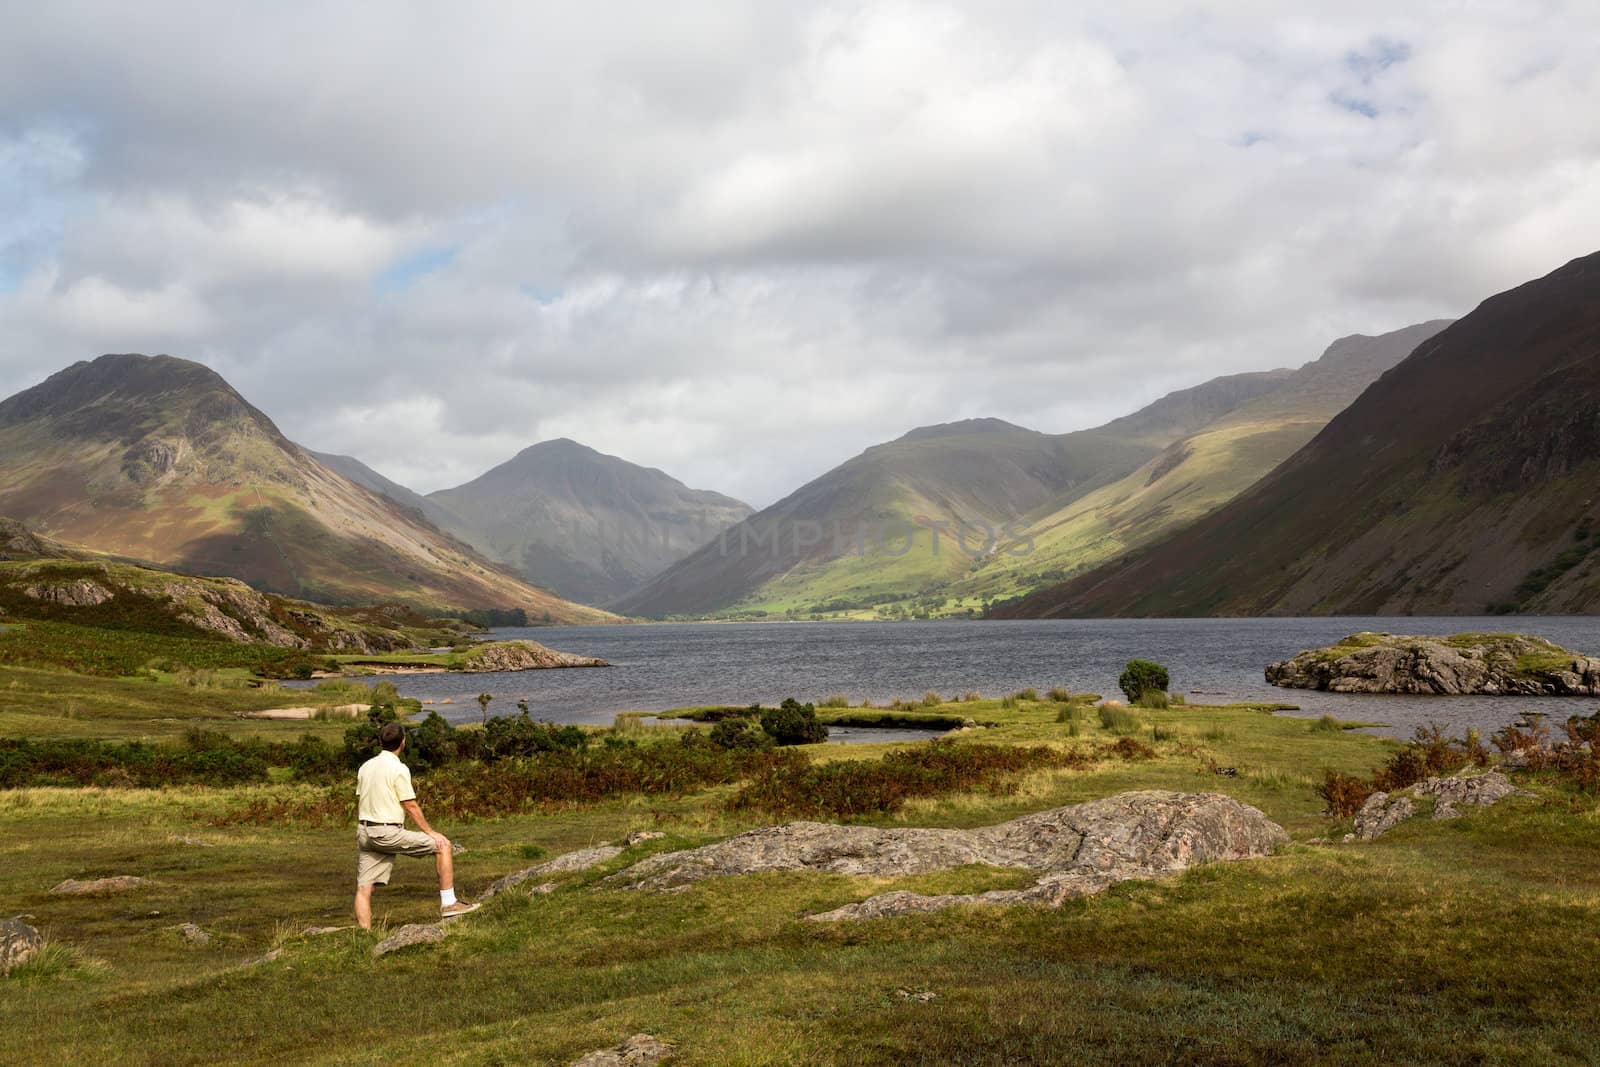 Wastwater or Wast Water in English Lake District on cloudy day